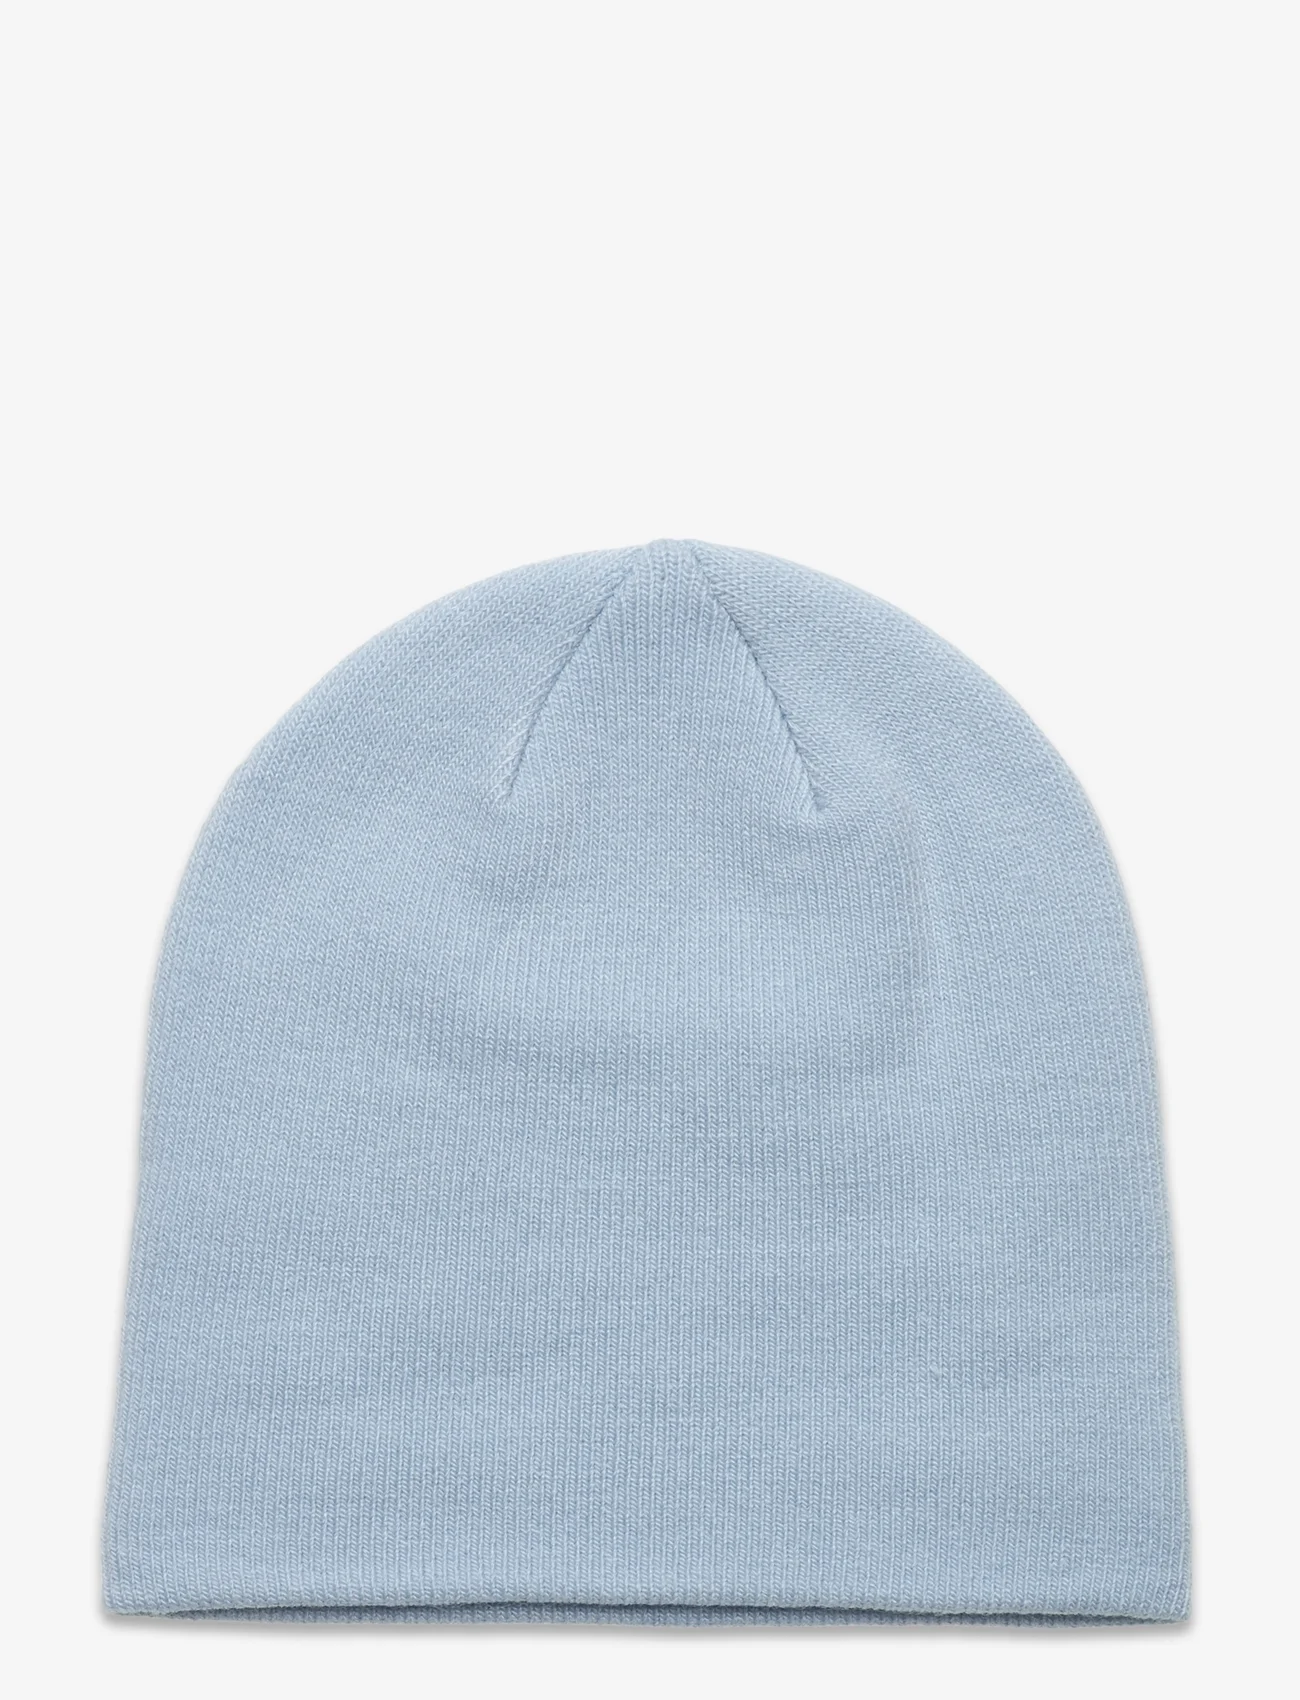 Helly Hansen - K OUTLINE BEANIE - pipot - 582 baby troope - 1